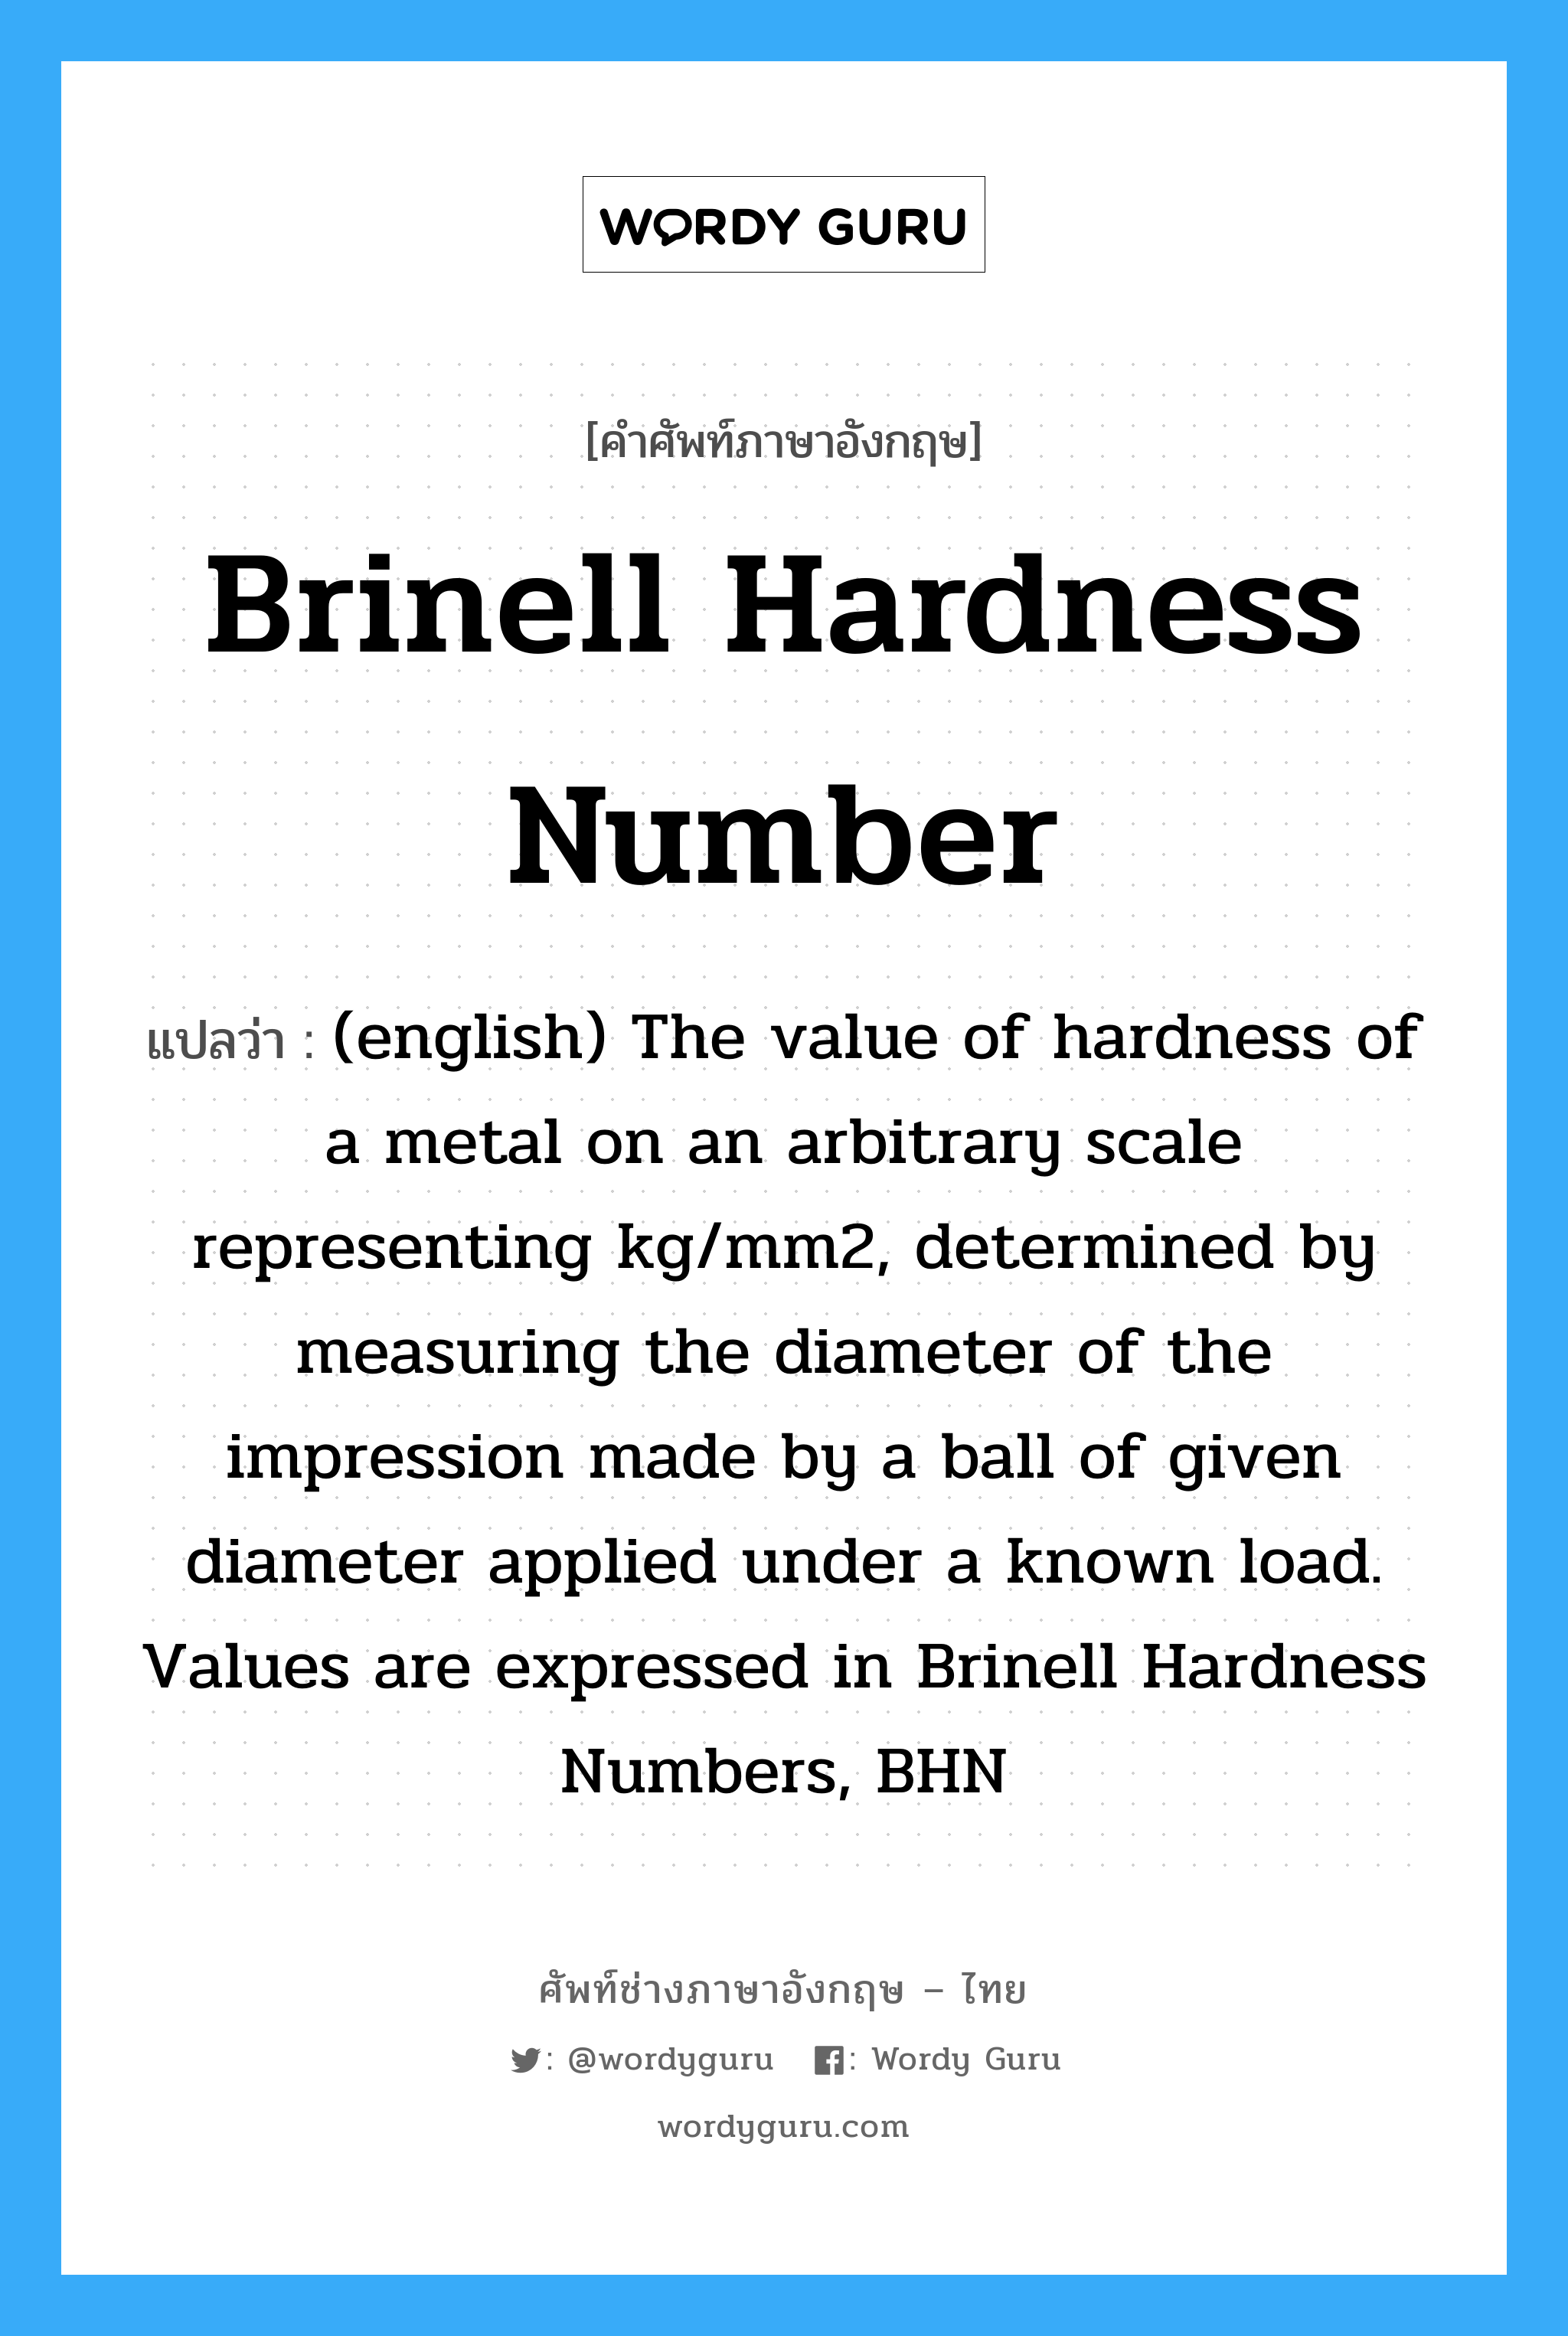 Brinell Hardness Number แปลว่า?, คำศัพท์ช่างภาษาอังกฤษ - ไทย Brinell Hardness Number คำศัพท์ภาษาอังกฤษ Brinell Hardness Number แปลว่า (english) The value of hardness of a metal on an arbitrary scale representing kg/mm2, determined by measuring the diameter of the impression made by a ball of given diameter applied under a known load. Values are expressed in Brinell Hardness Numbers, BHN